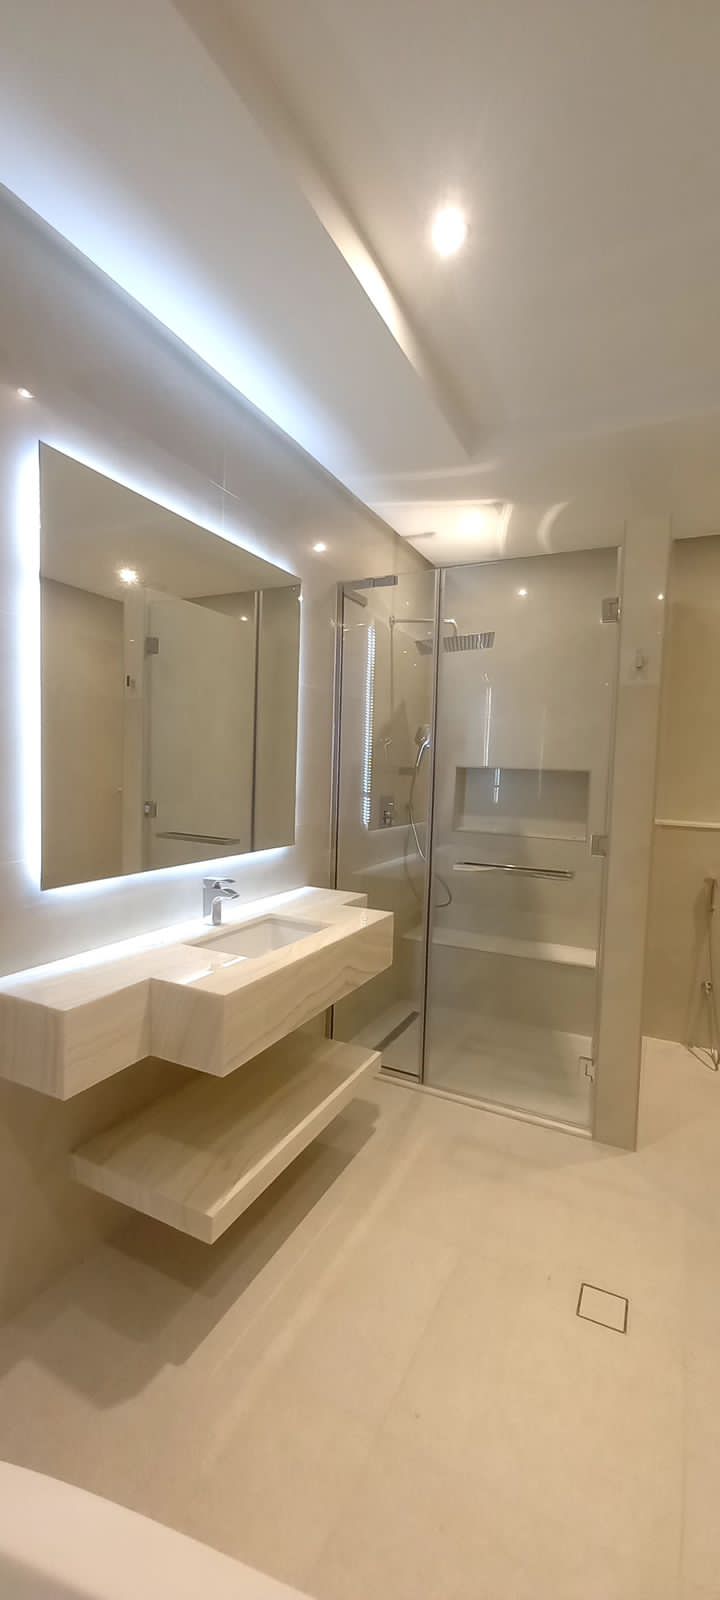 Bathroom Renovations Shower Glass Partitions & Mirrors